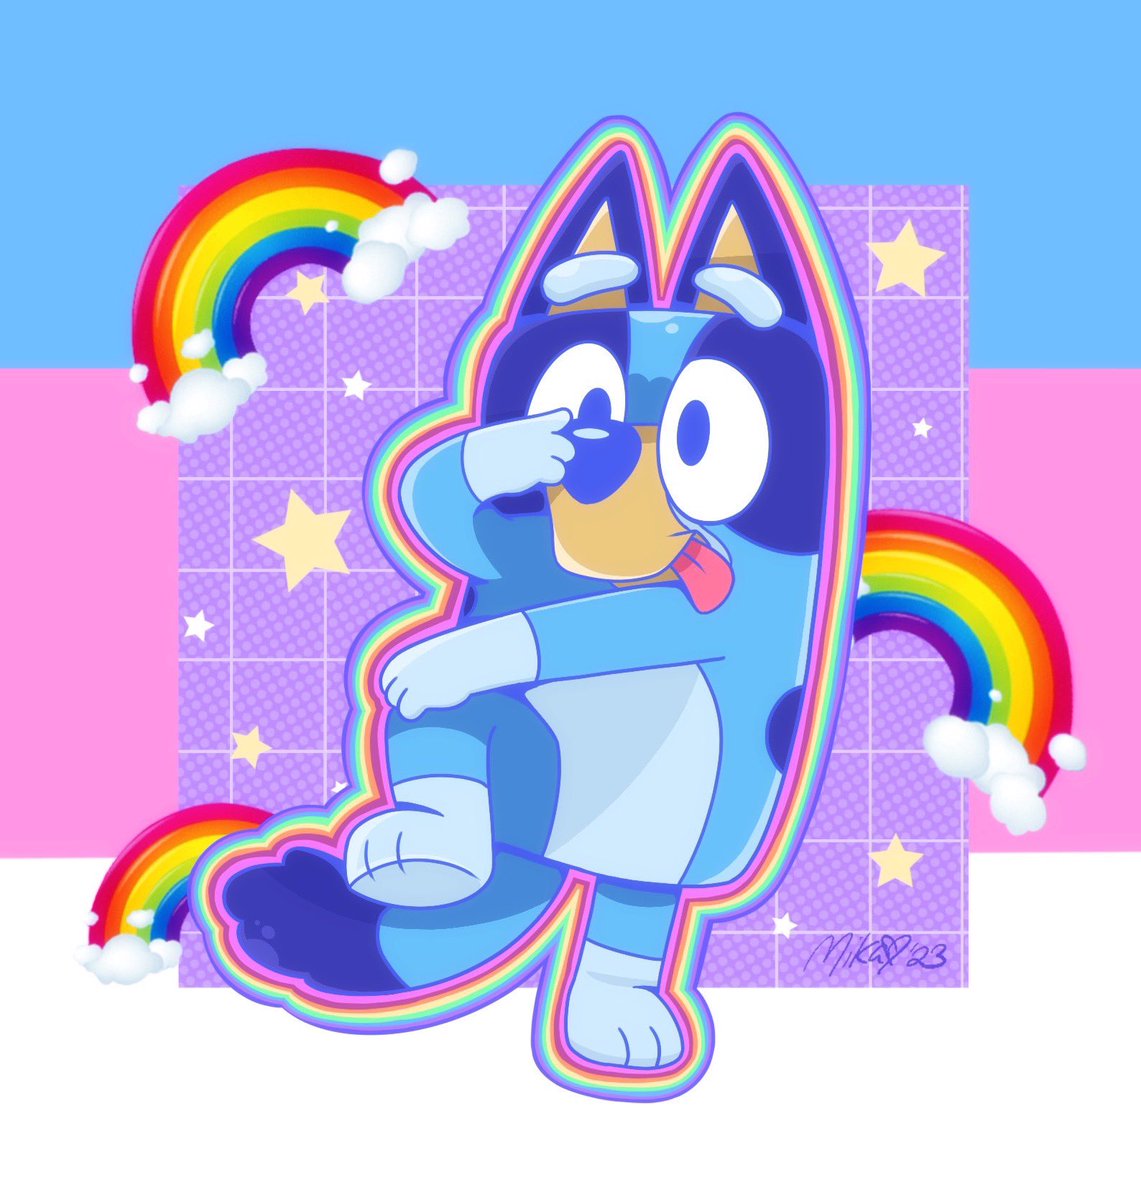 Happy Pride from Bluey. Whoever you are, be you - but be proud. 🏳️‍🌈

#Bluey #blueyfanart #PrideMonth #prideART #Pride2023